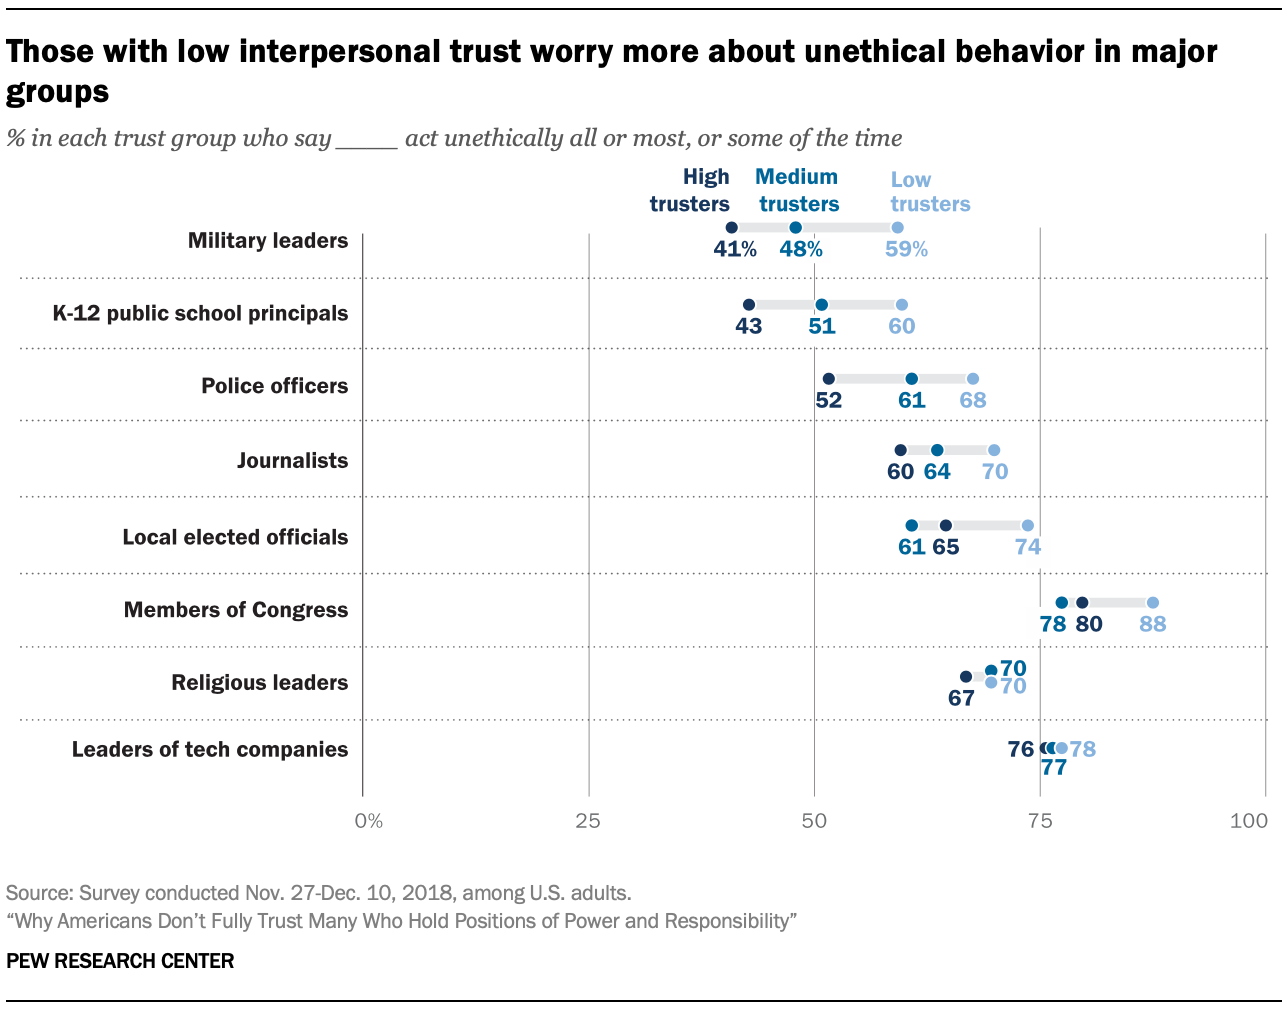 Those with low interpersonal trust worry more about unethical behavior in major groups